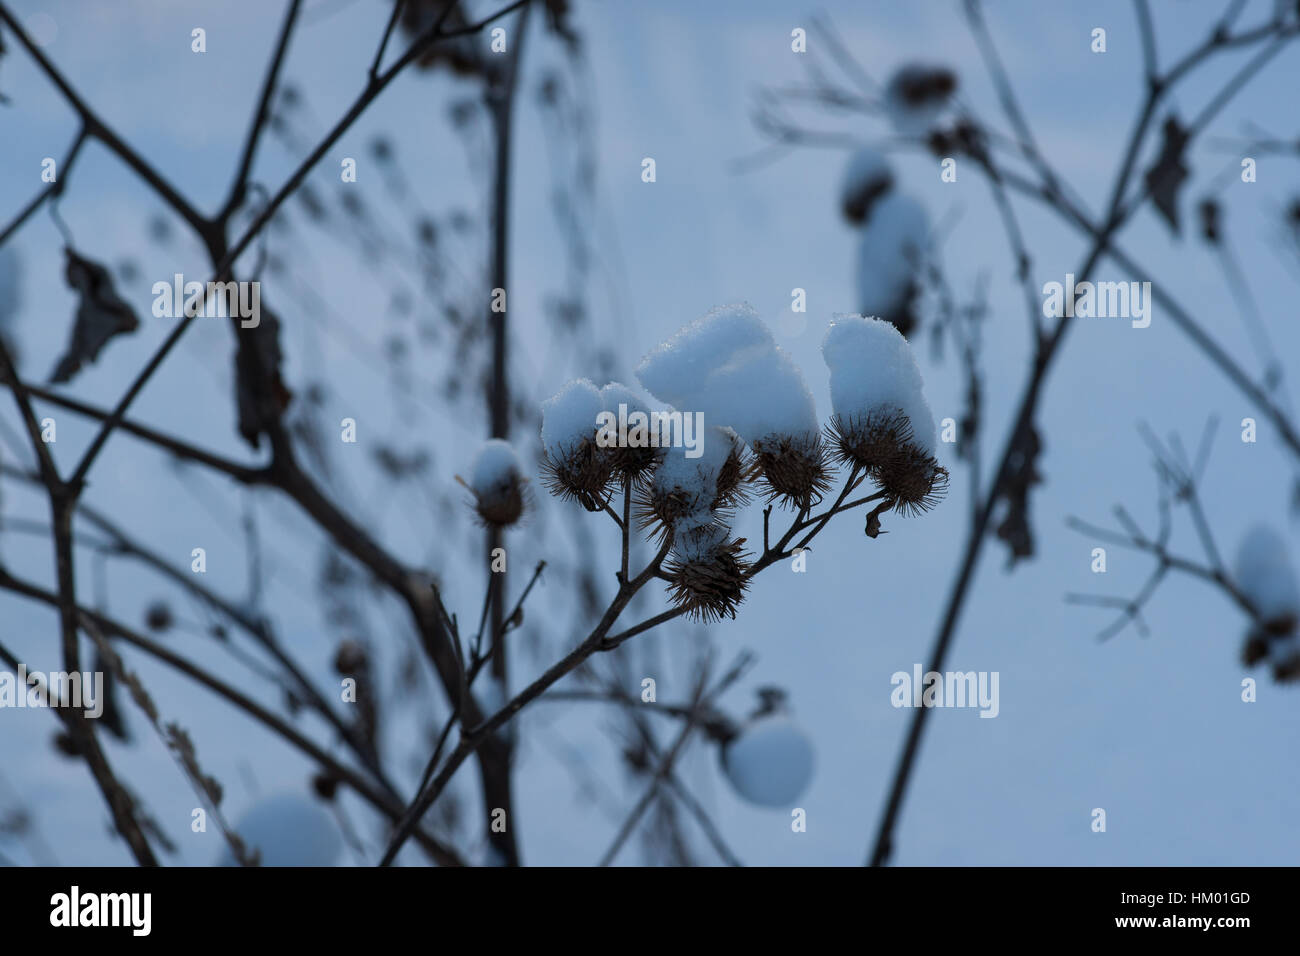 Dry snow covered common burdock against the white and bluish background of winter forest. Stock Photo